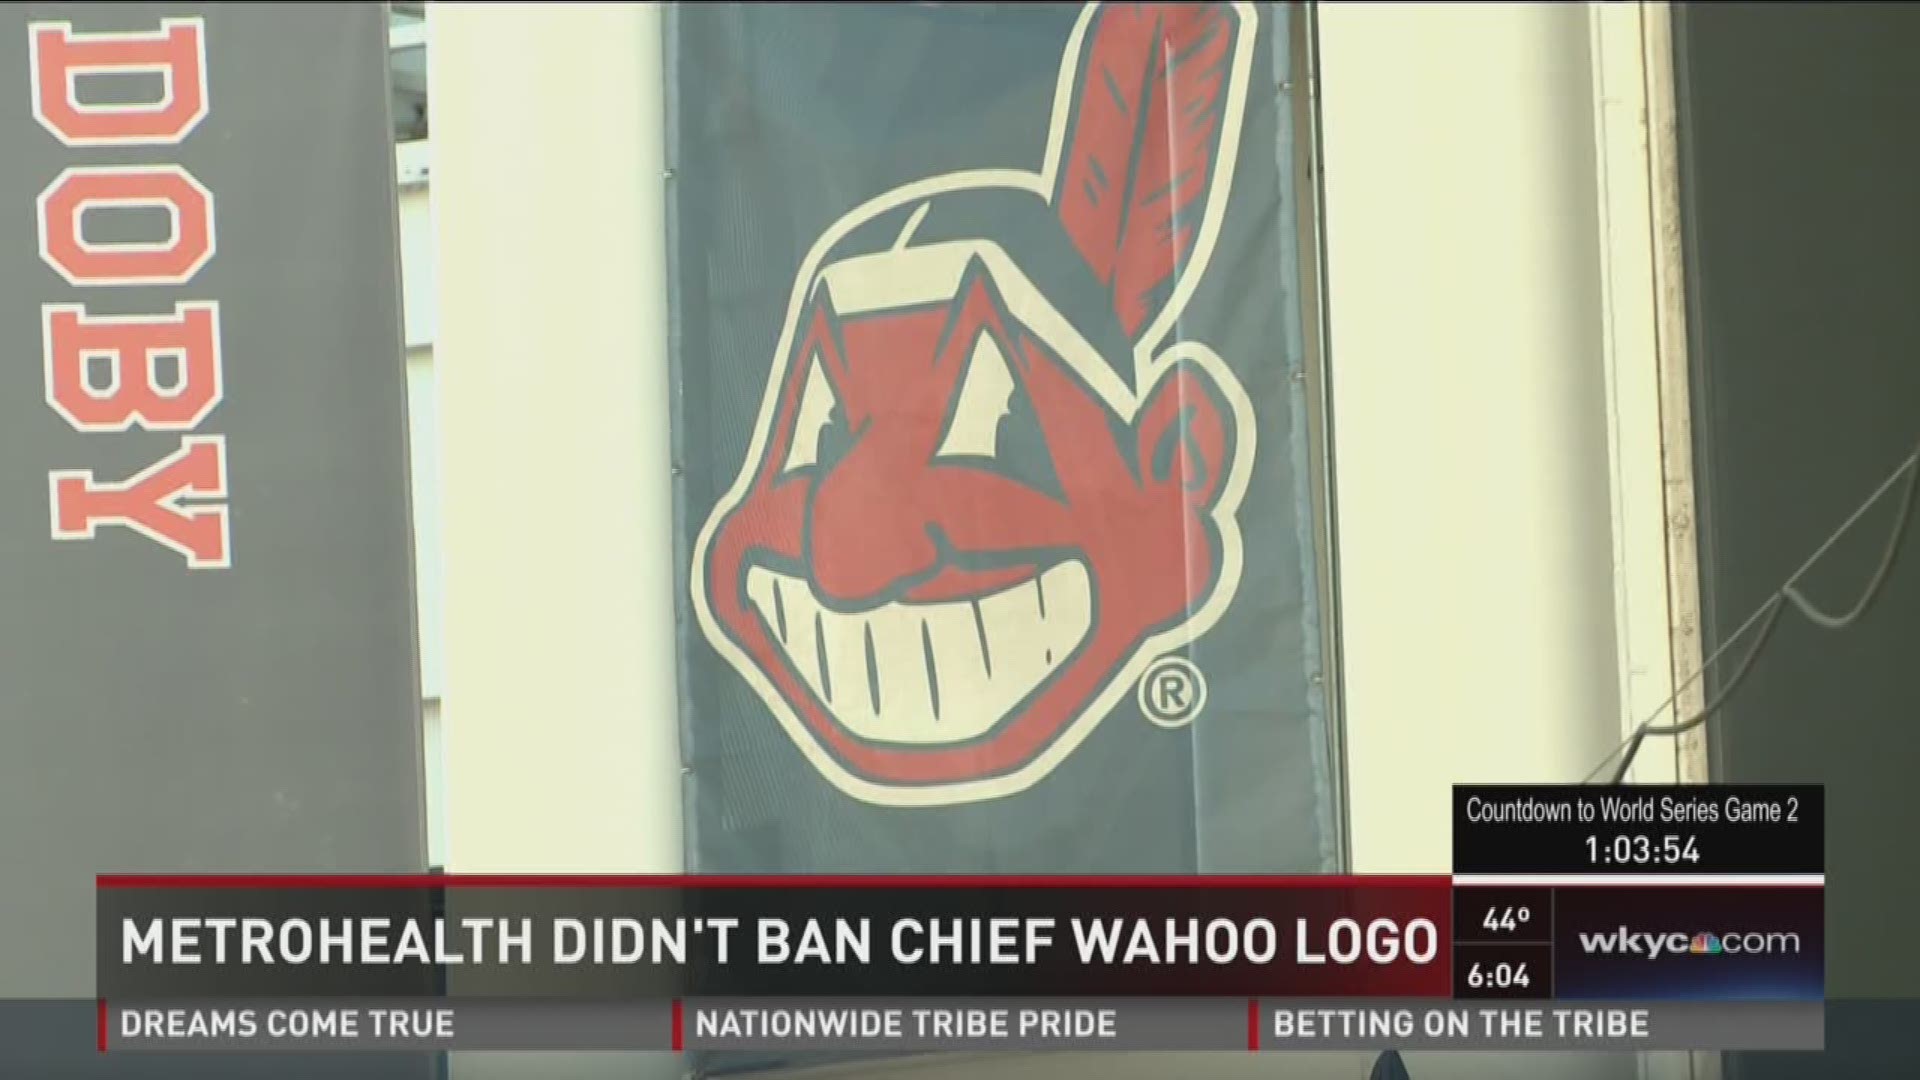 Baseball commissioner plans to discuss Chief Wahoo logo with